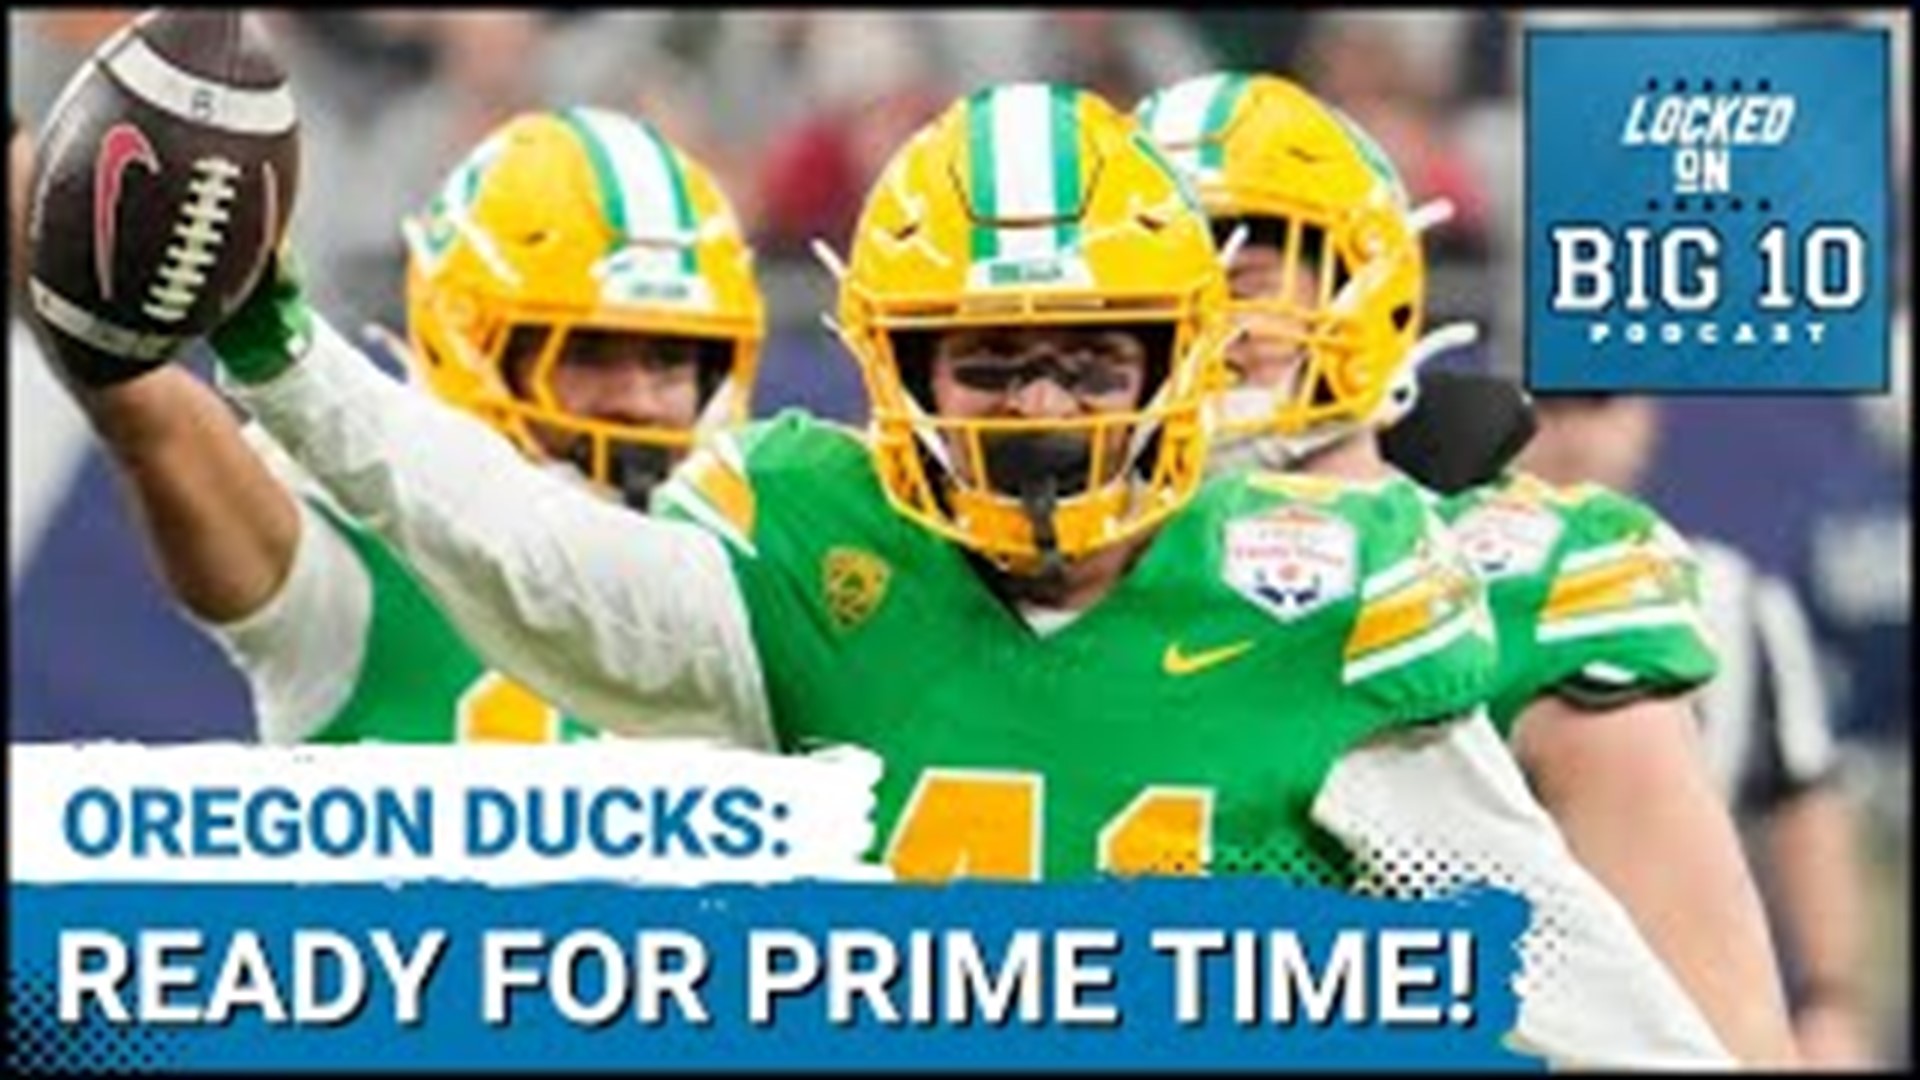 The Oregon Ducks football team is ready to jump to the Big 10.  Dan Lanning and his college football team is ready to claim a Big 10 title.